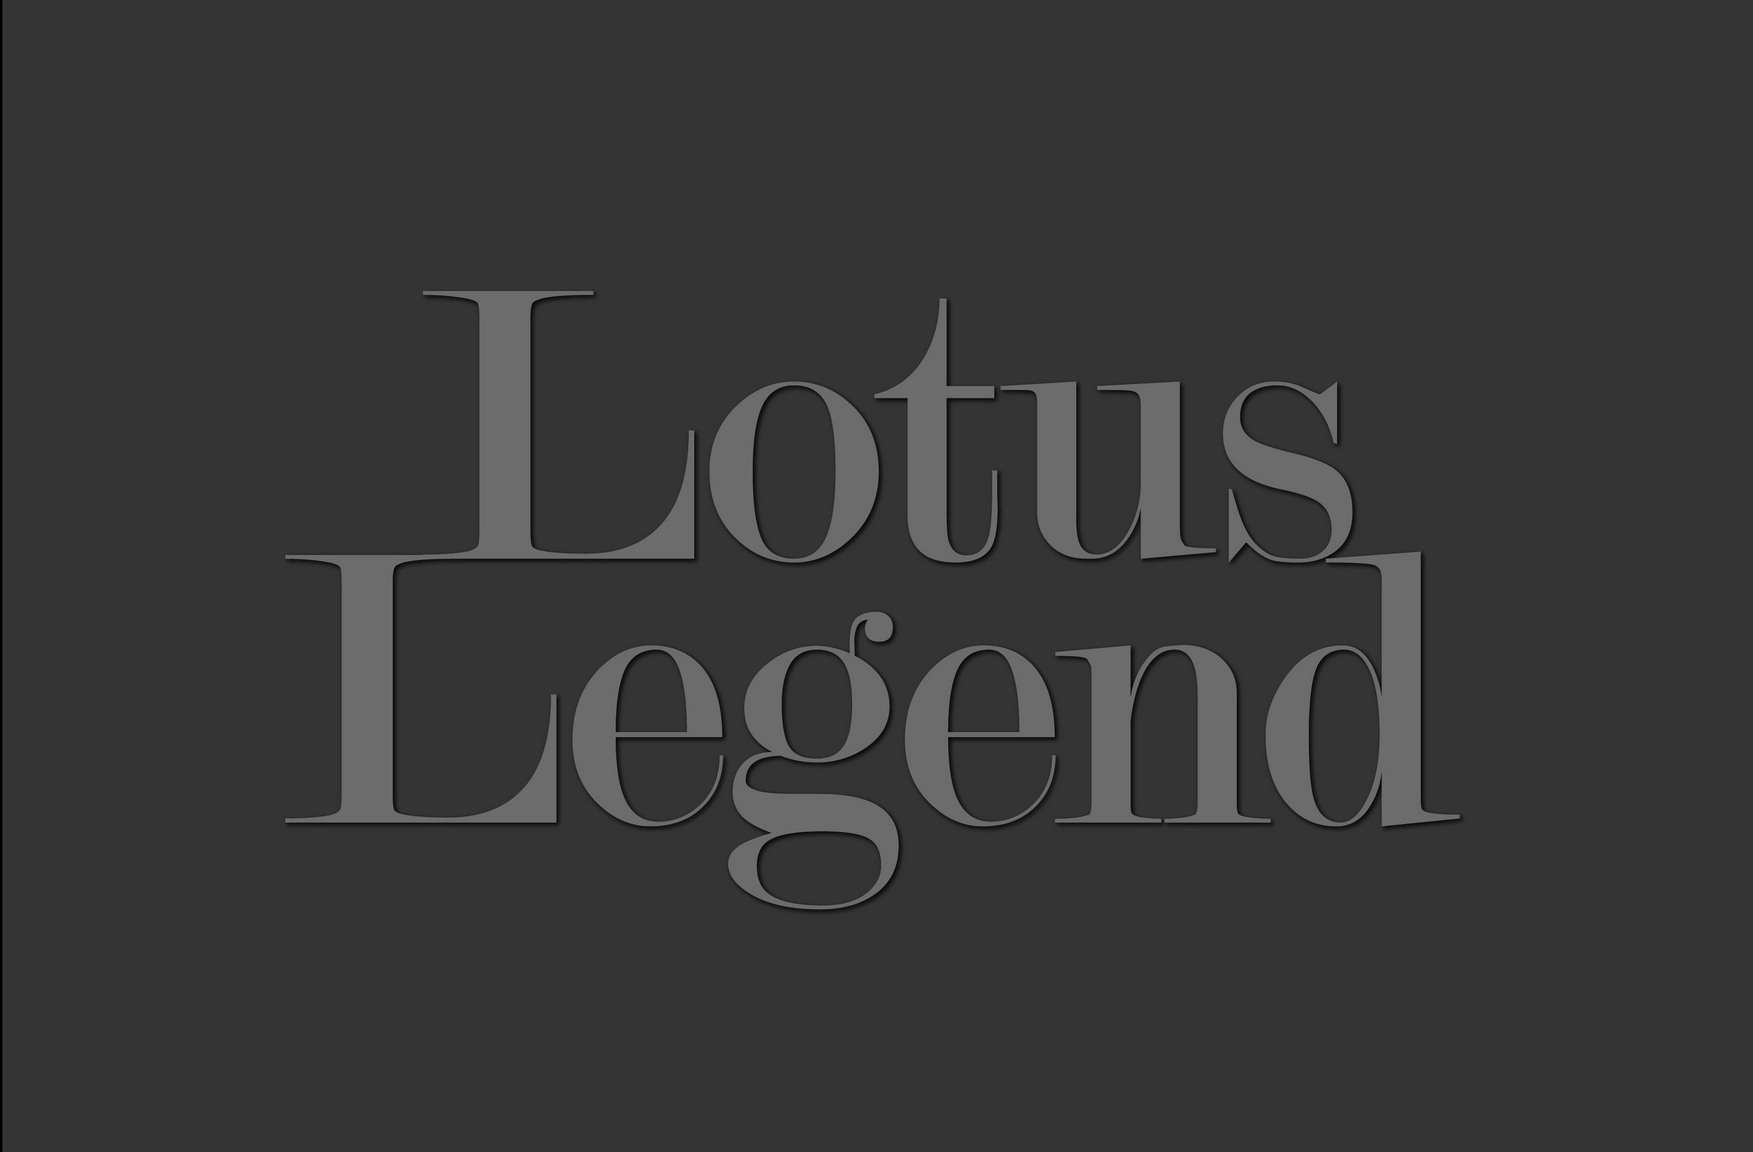 Adfest Recognises Asian Creative Leaders With The Launch Of The 'Lotus Legend Award'